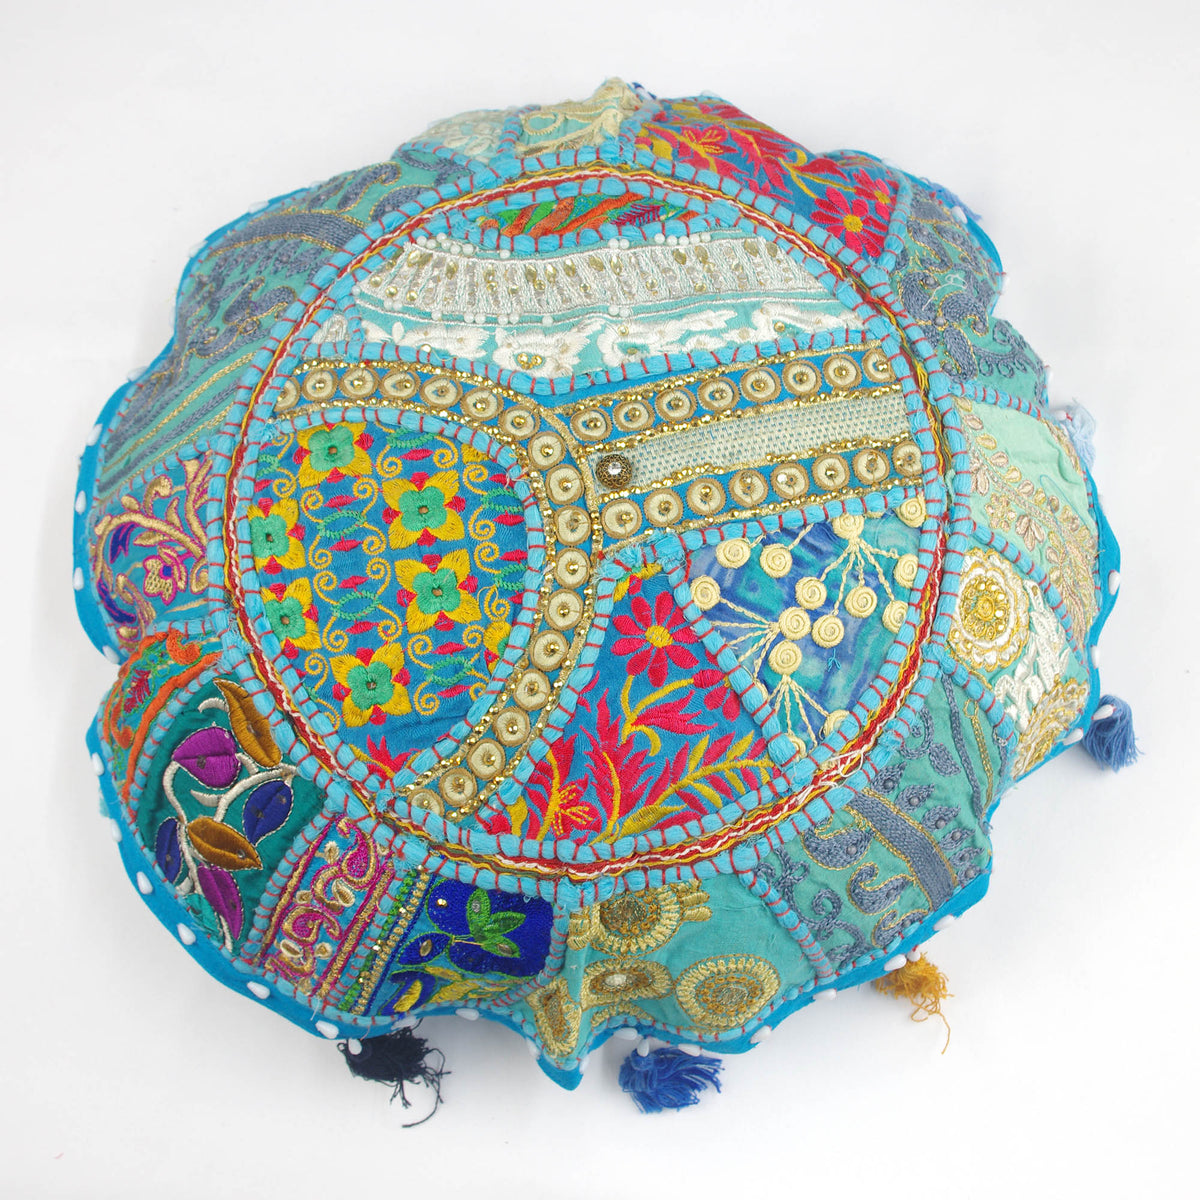 Sky Blue Beaded Round Floor Embroidered Patchwork Pouf Ottoman Indian Vintage Cushion Cover 18"